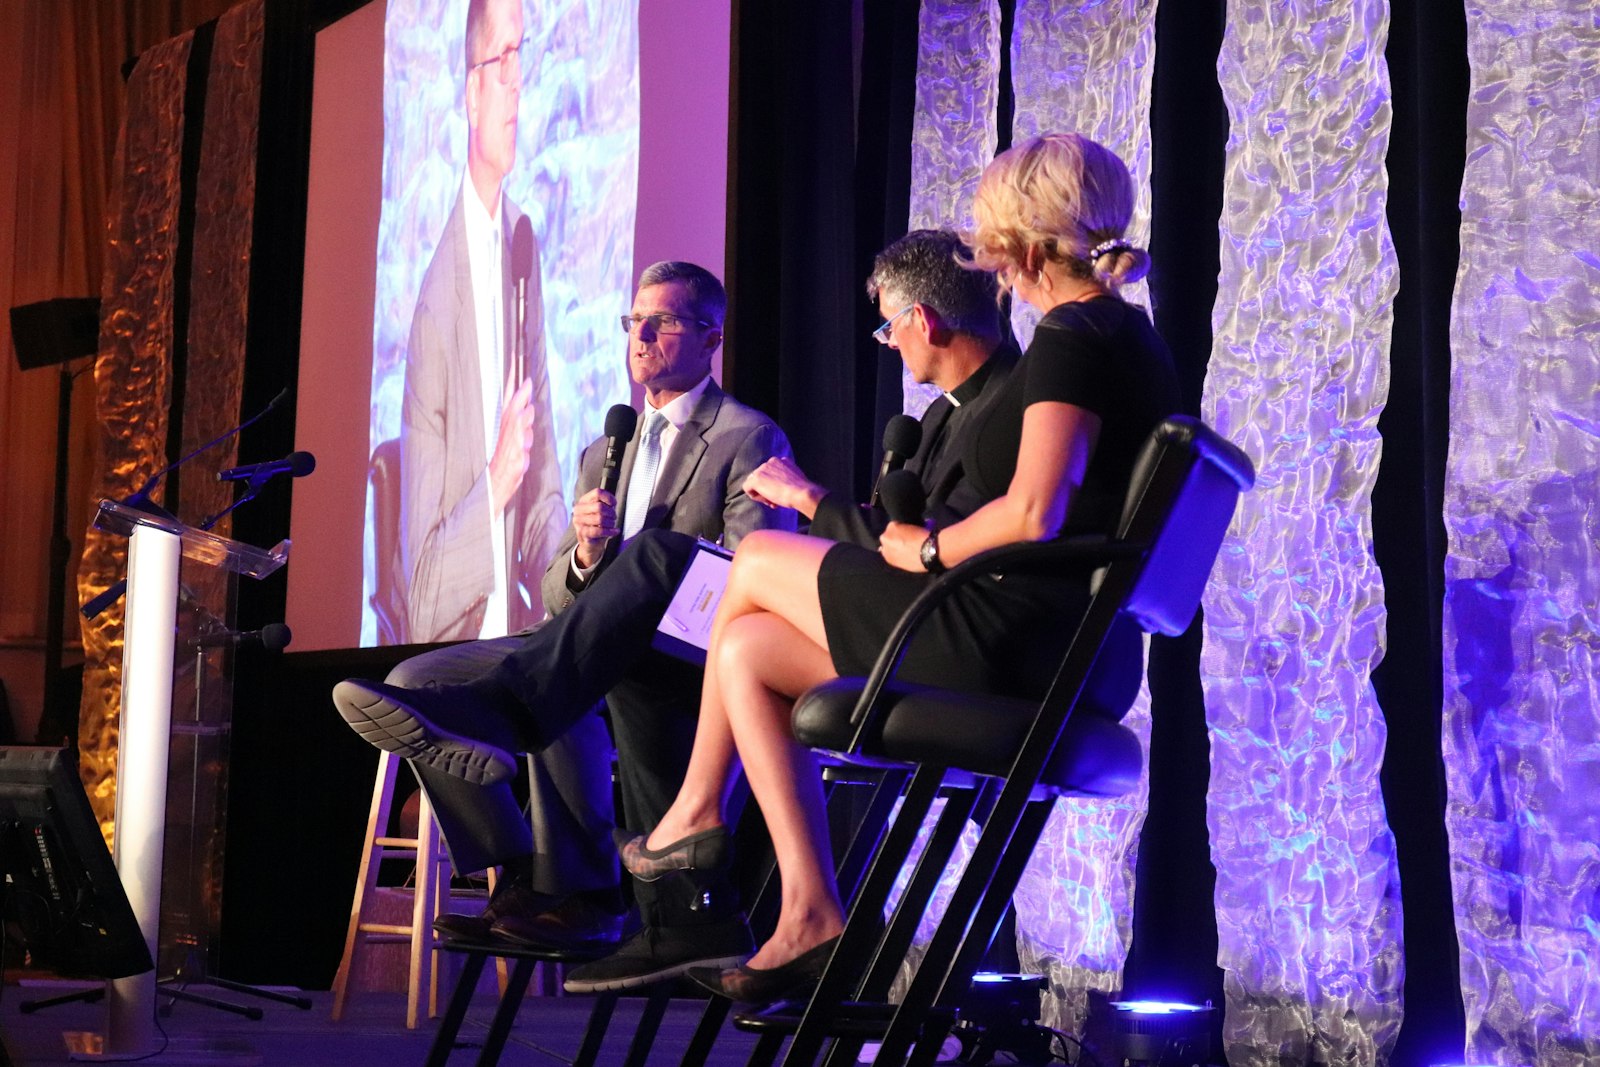 Fr. John Riccardo of Acts XXIX, center, hosts Jim and Sarah Harbaugh in a question-and-answer session about their pro-life advocacy and how their values shape their lives and professions. (Courtesy of John Stockwell)